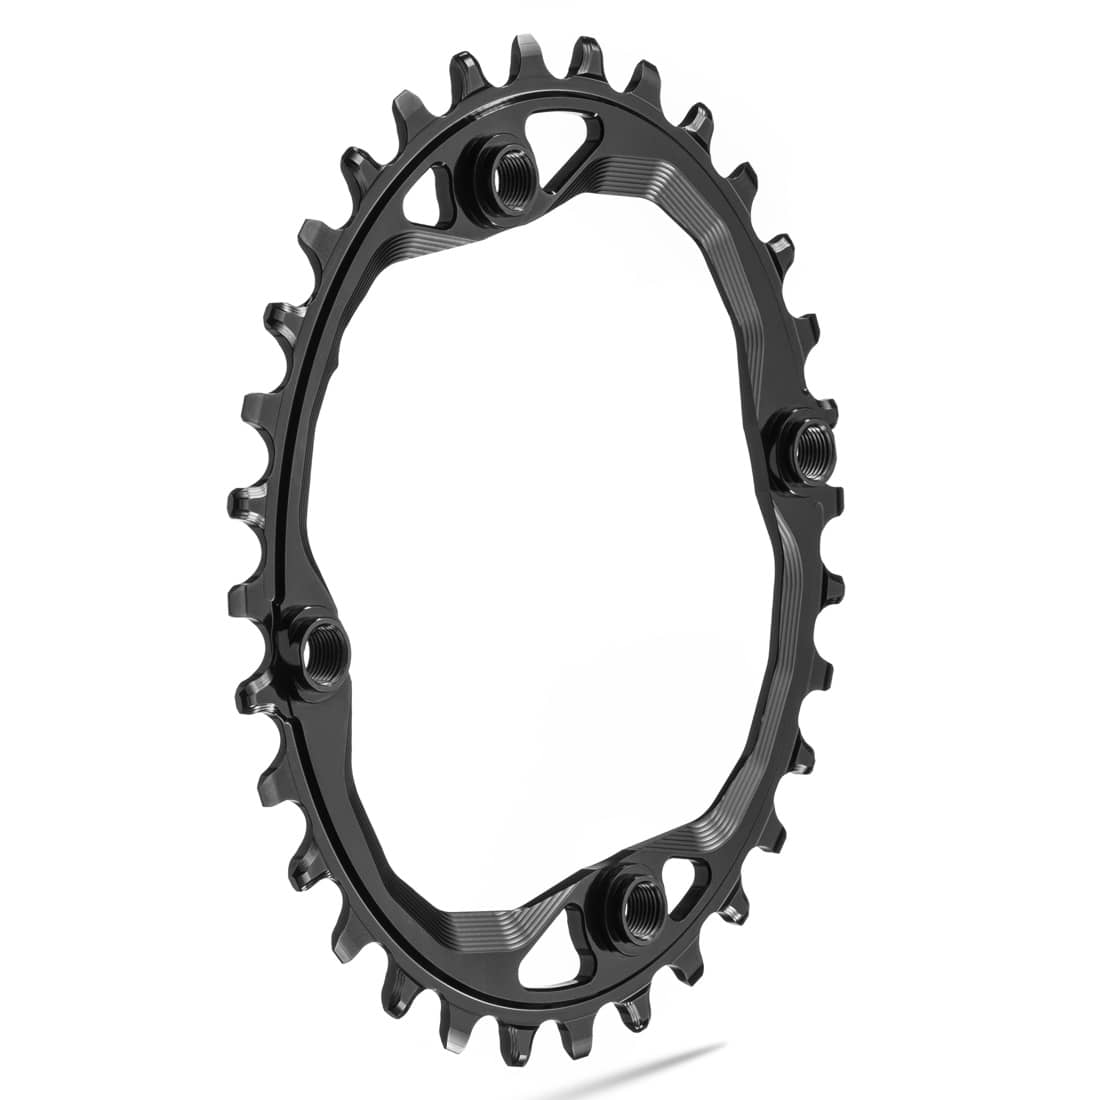 absoluteblack OVAL 104bcd traction chainring for Hyperglide+ 12spd chain